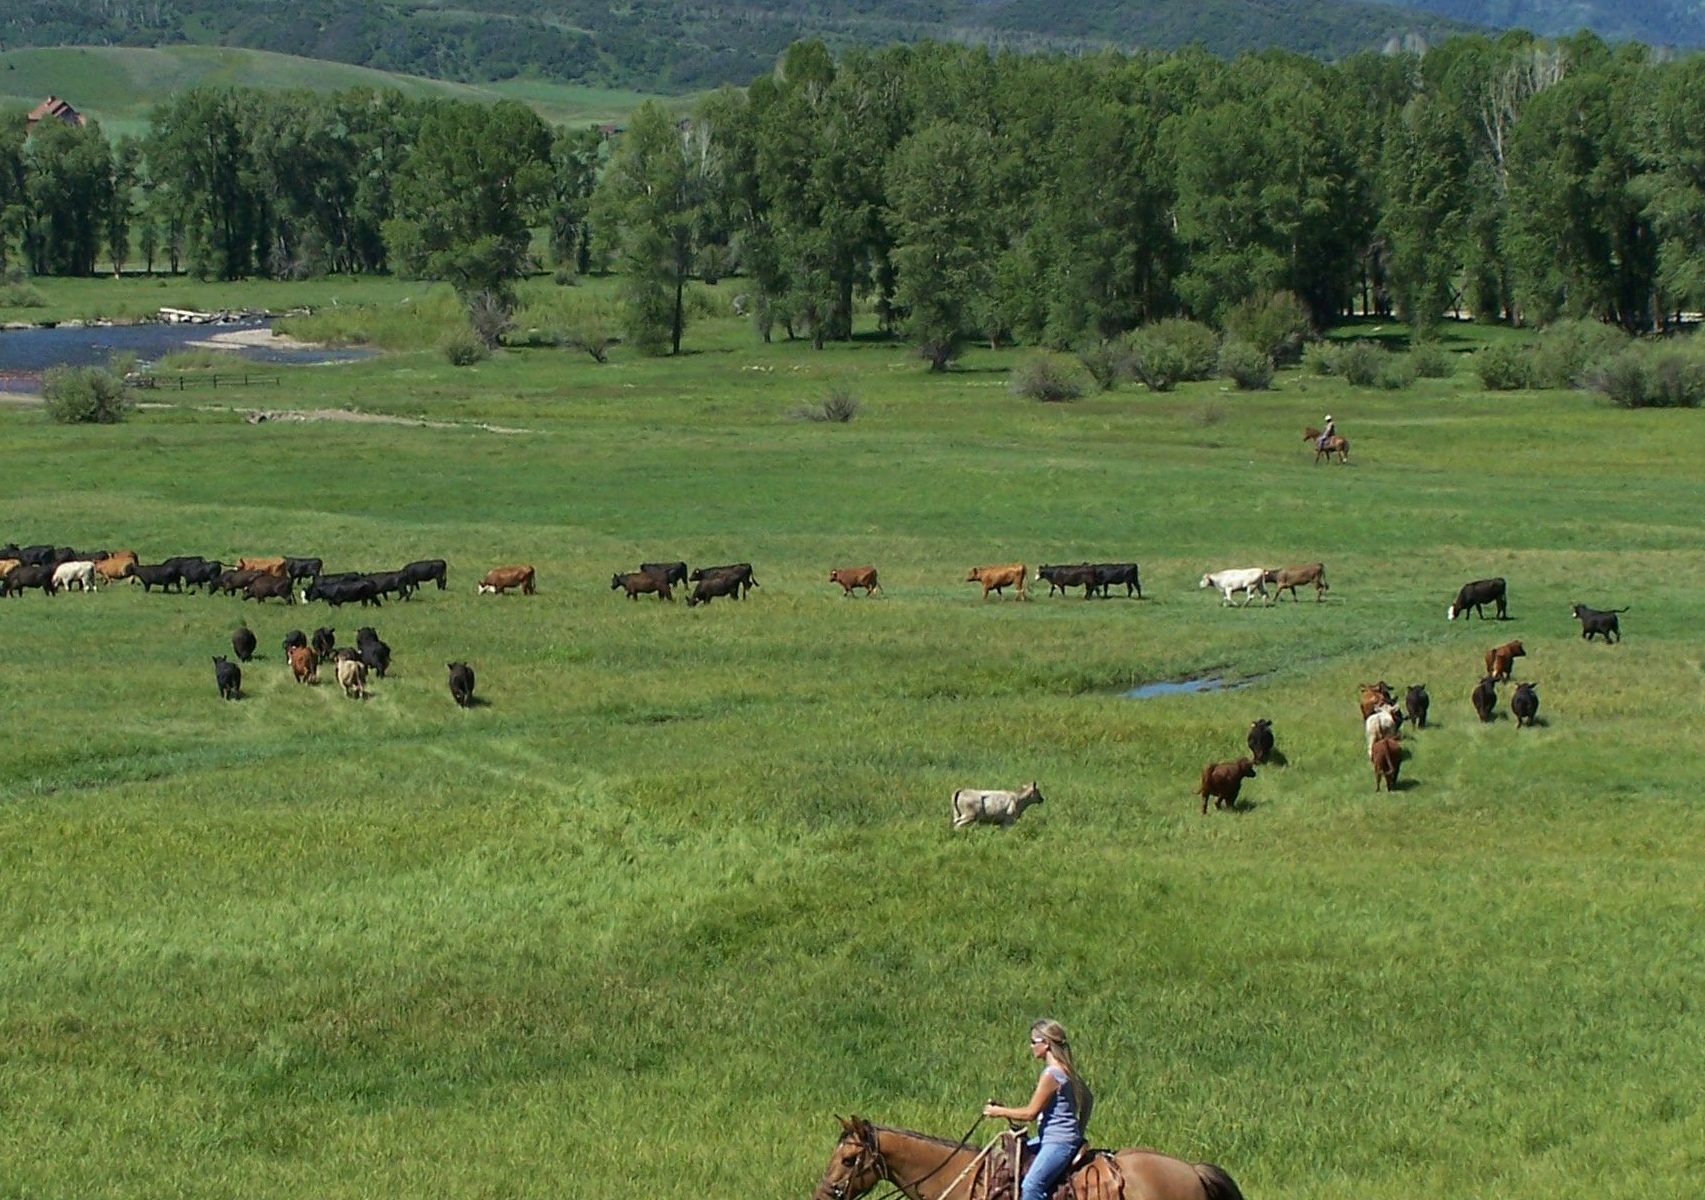 Christy Belton on horseback with her cows